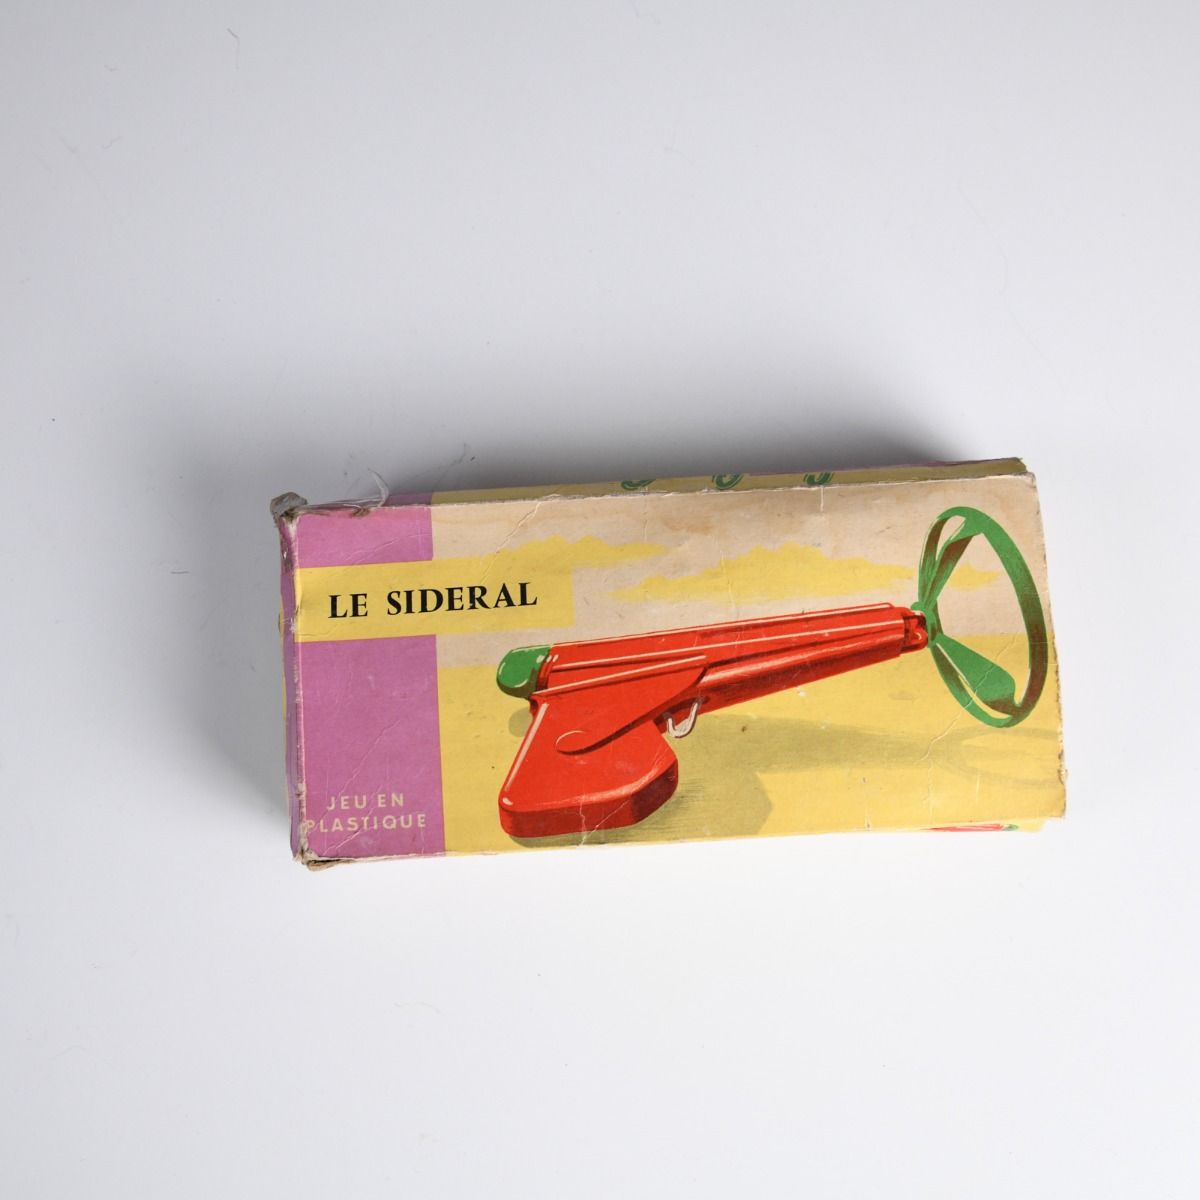 Vintage 1960s Le Sideral Plastic Space Gun Toy